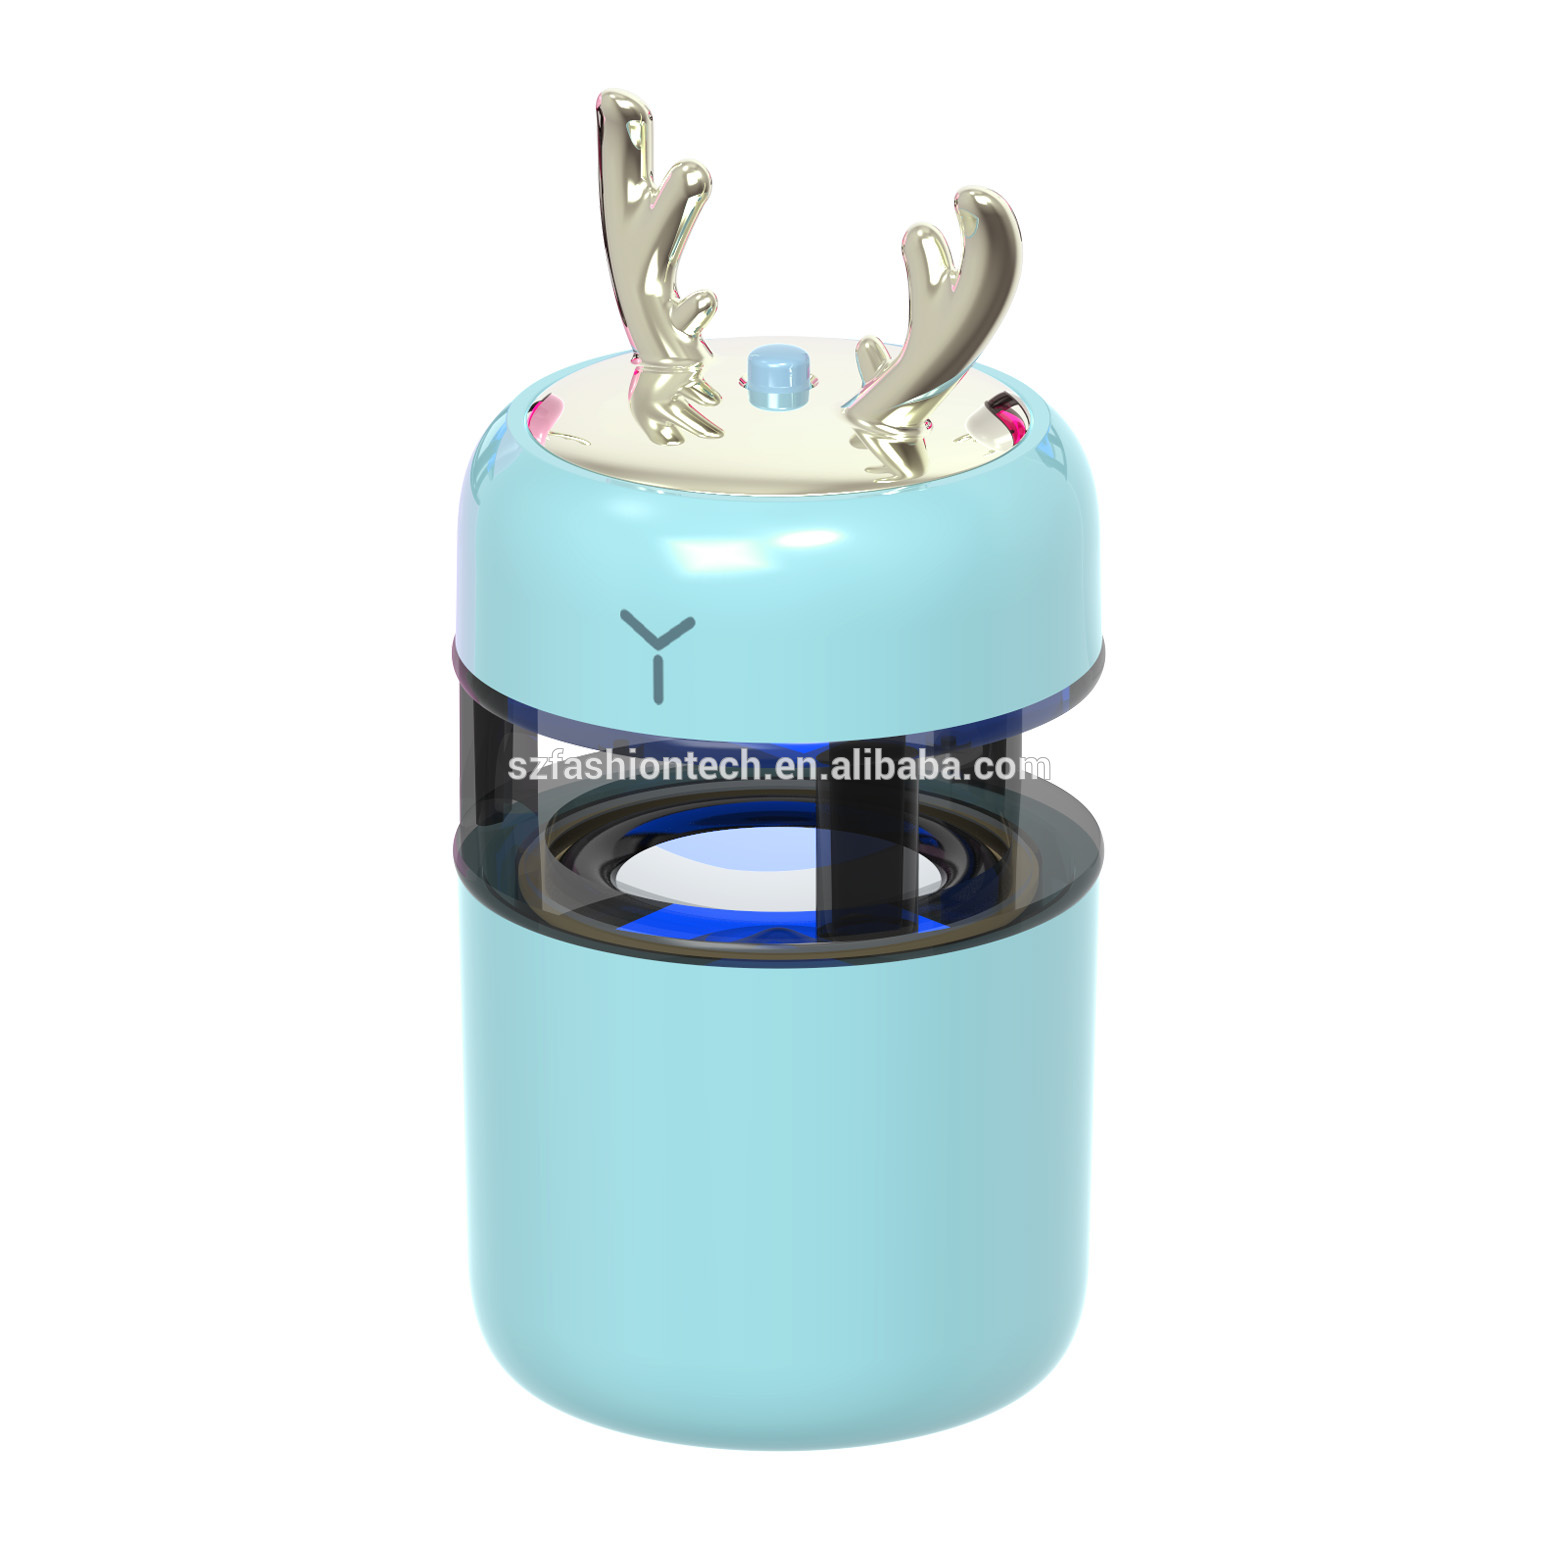 New Arrival Christmas Gifts Roly- Poly Bluetooth Speaker with custom logo